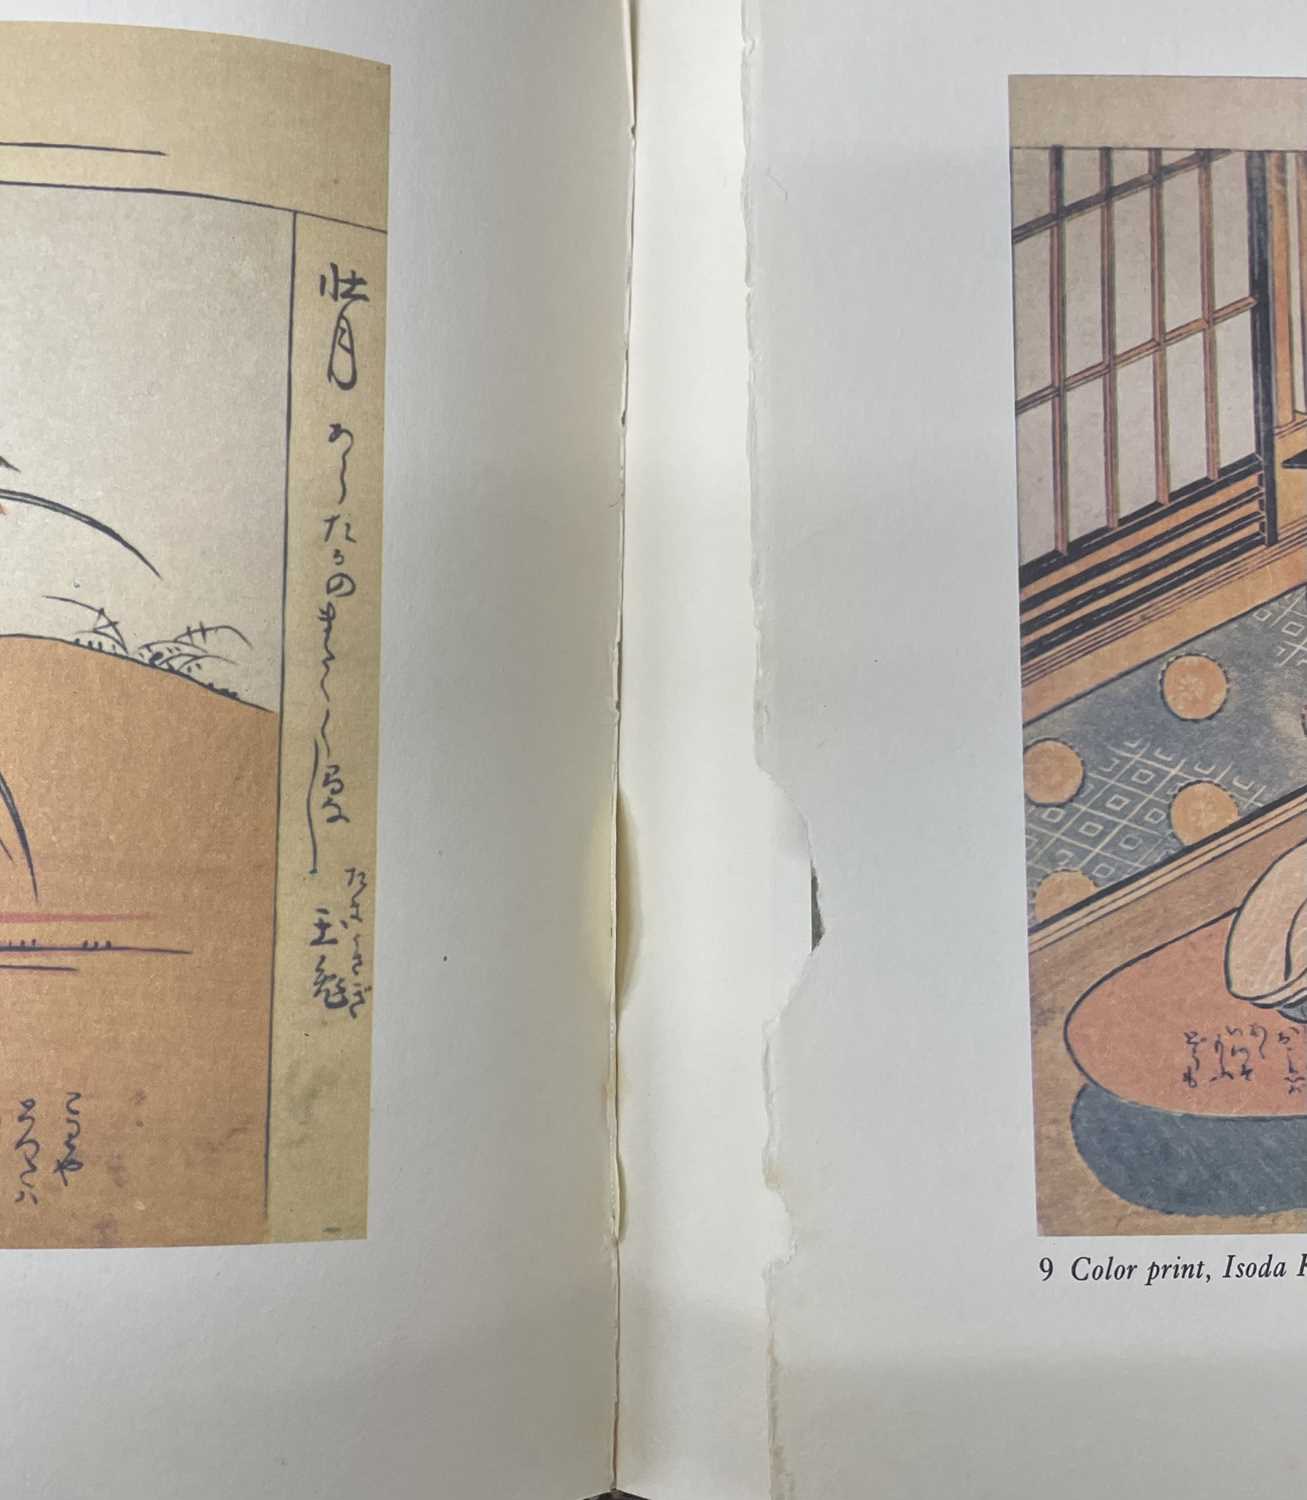 TOM AND MARY ANNE EVANS: SHUNGA, THE ART OF LOVE IN JAPAN, London, Paddington Press, 1975. - Image 3 of 3